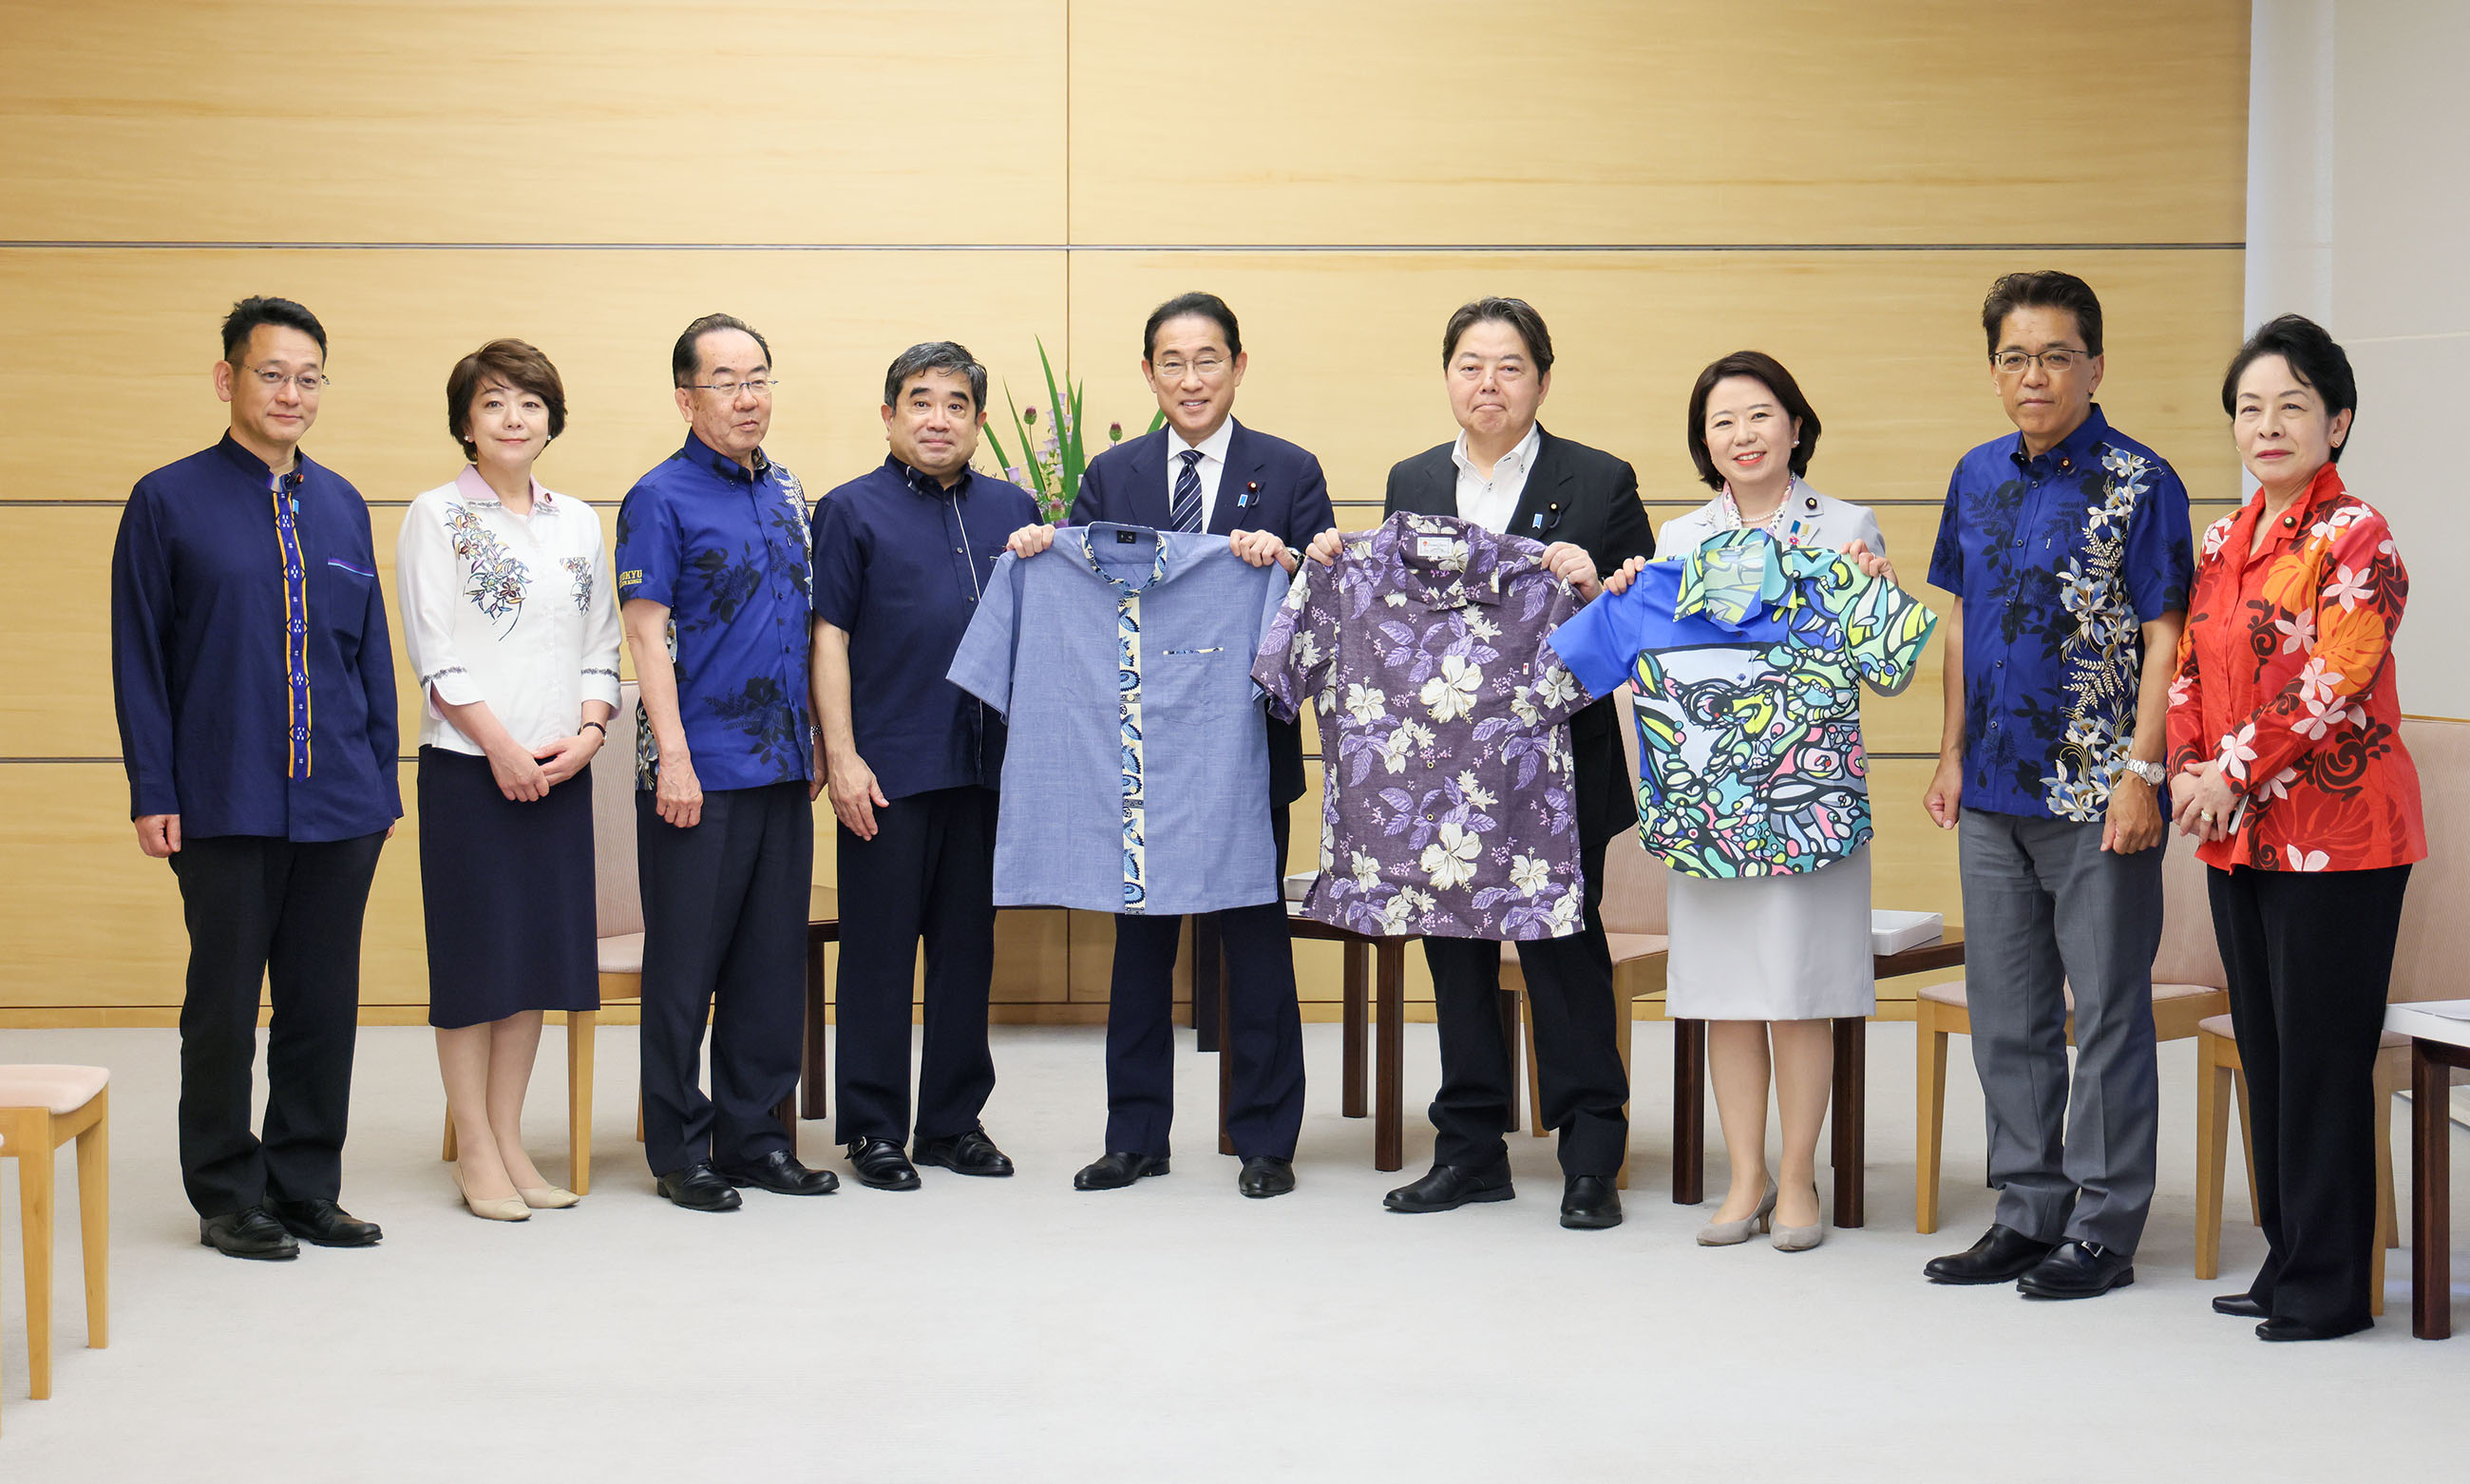 Presentation of Kariyushi Wear by the Vice Governor of Okinawa Prefecture